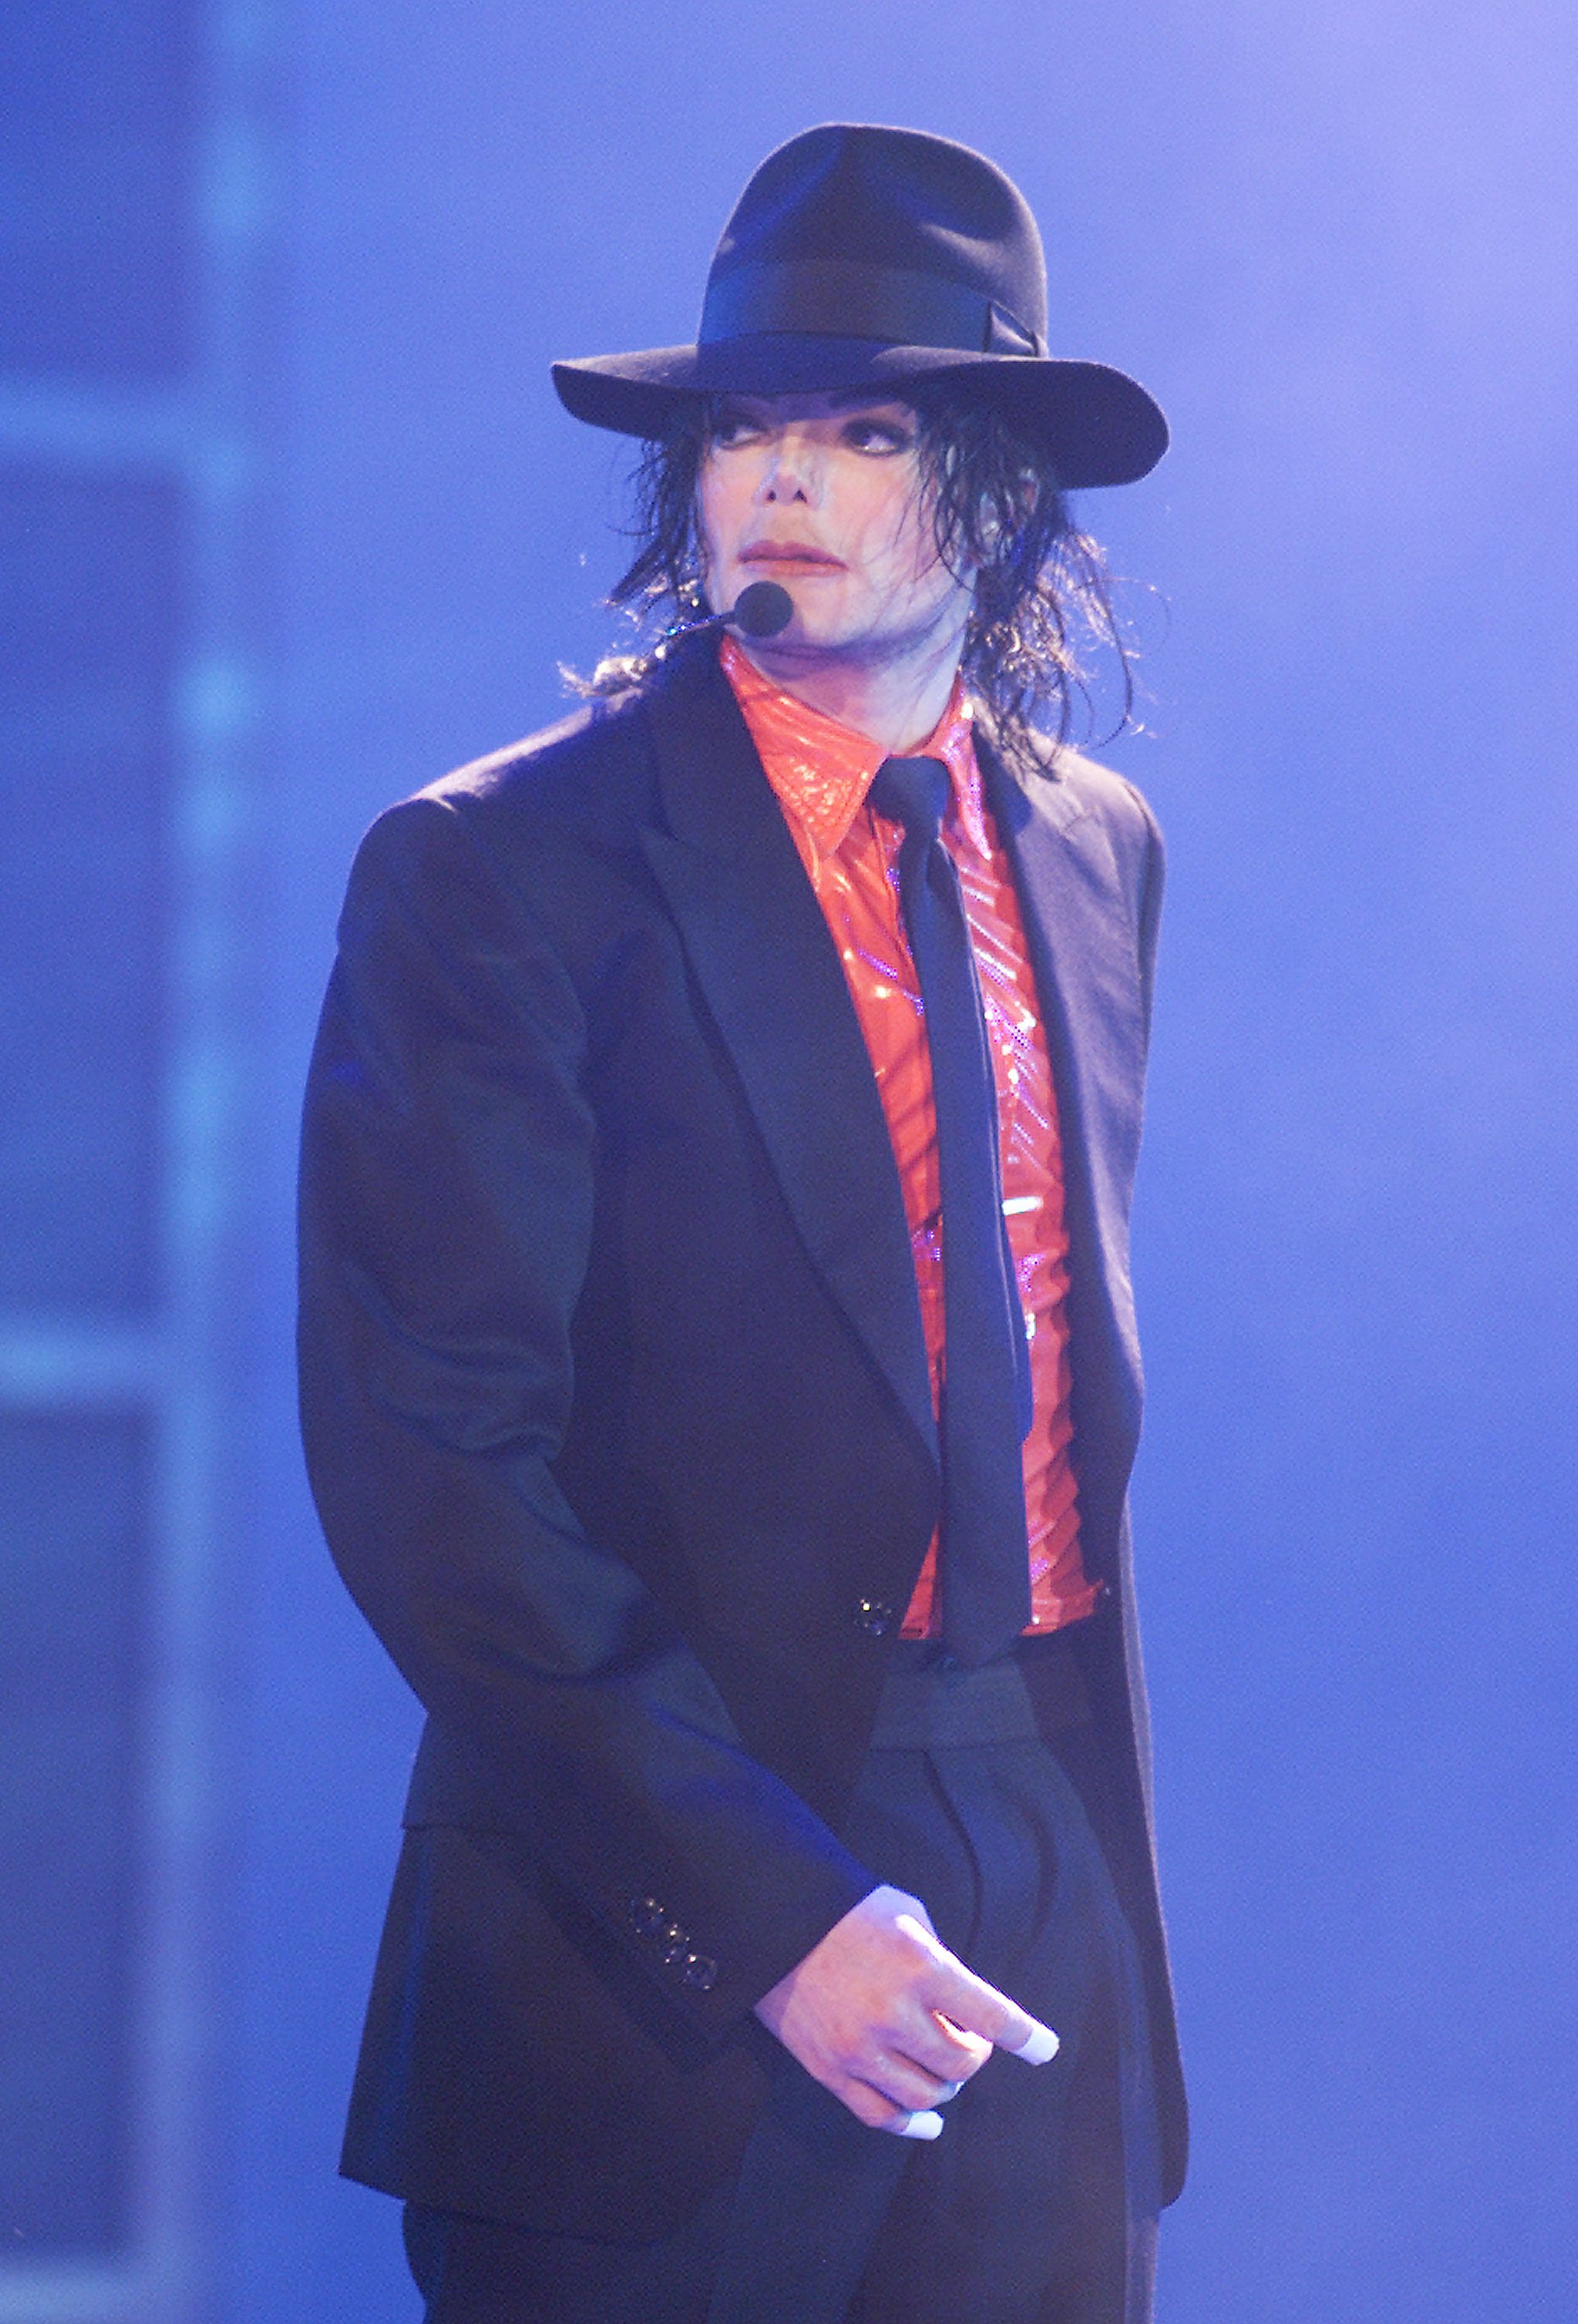 Michael Jackson at the taping of "American Bandstand's 50th...A Celebration" in California on April 20, 2002 | Photo: Getty Images